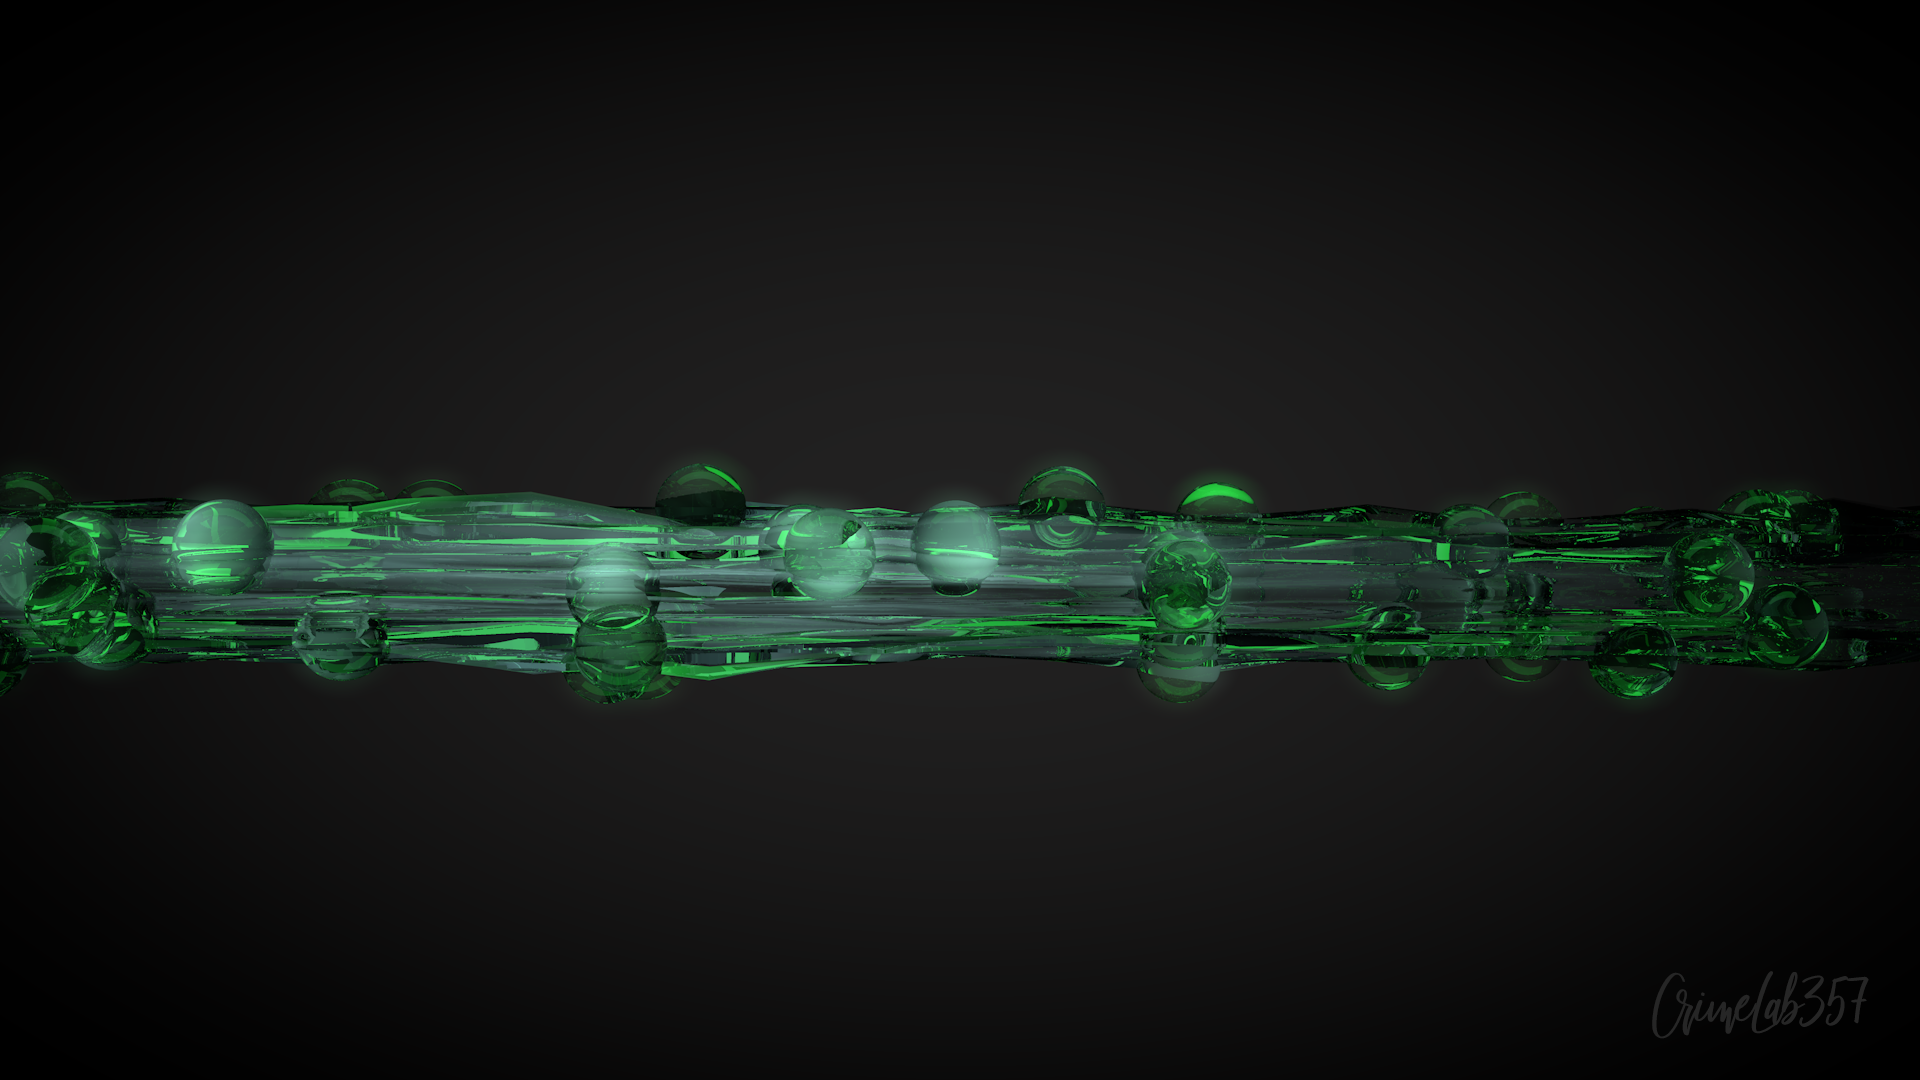 General 1920x1080 3D Abstract glass design watermarked CGI